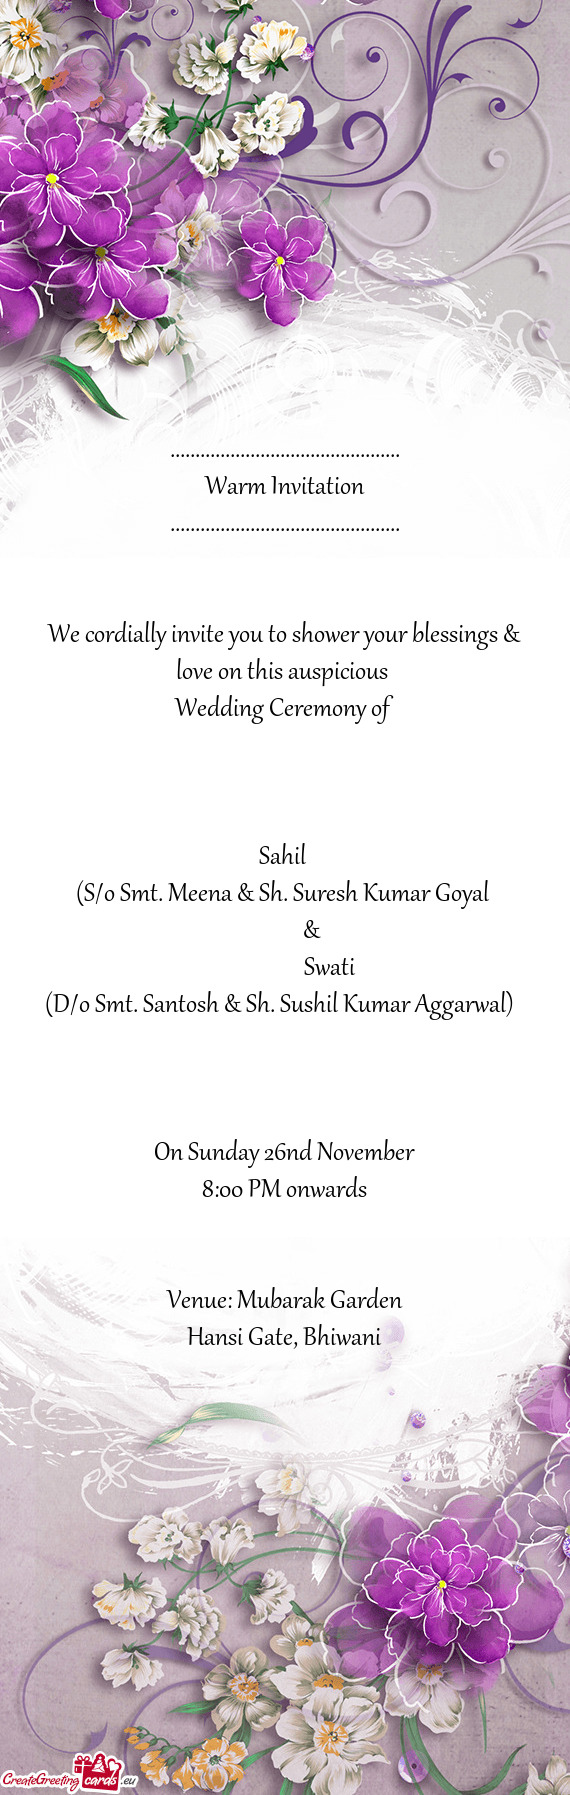 We cordially invite you to shower your blessings & love on this auspicious